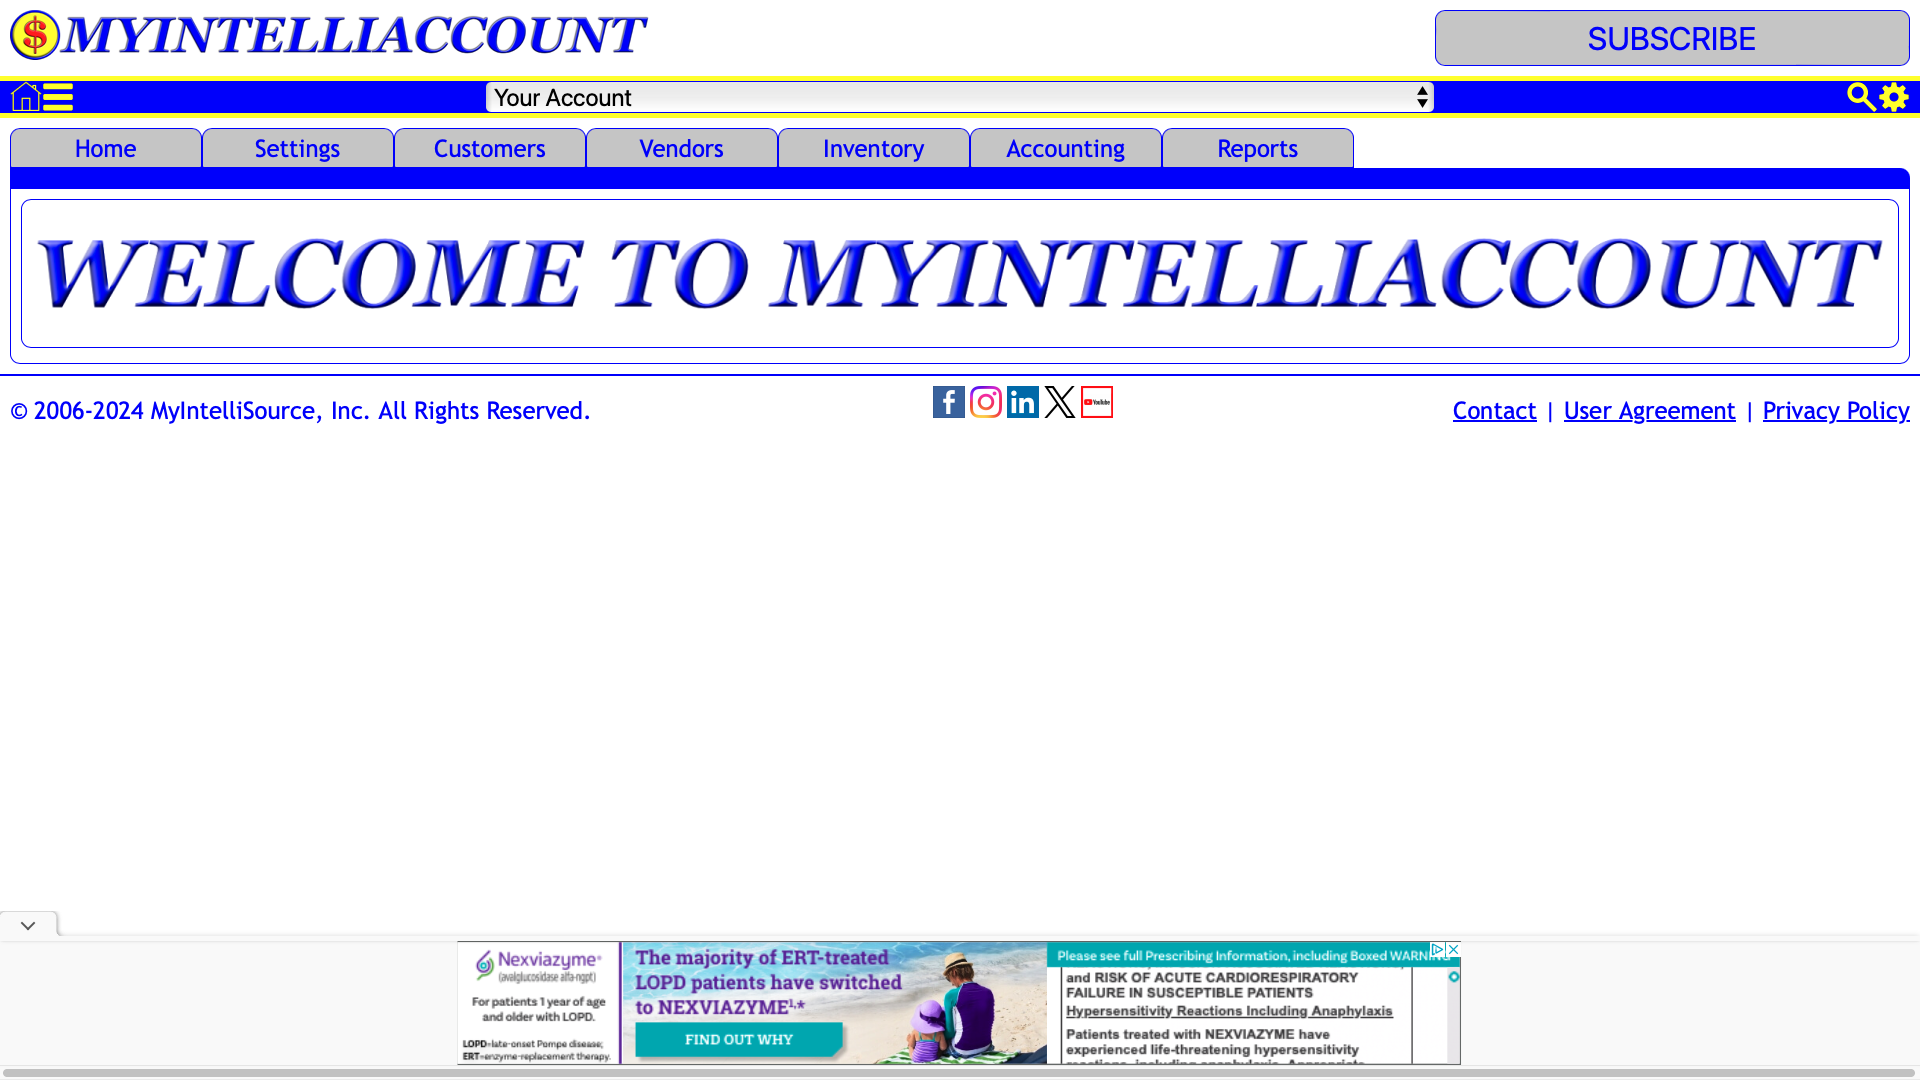 MyIntelliAccount For The Web | MyIntelliAccount™ Cloud Accounting Software